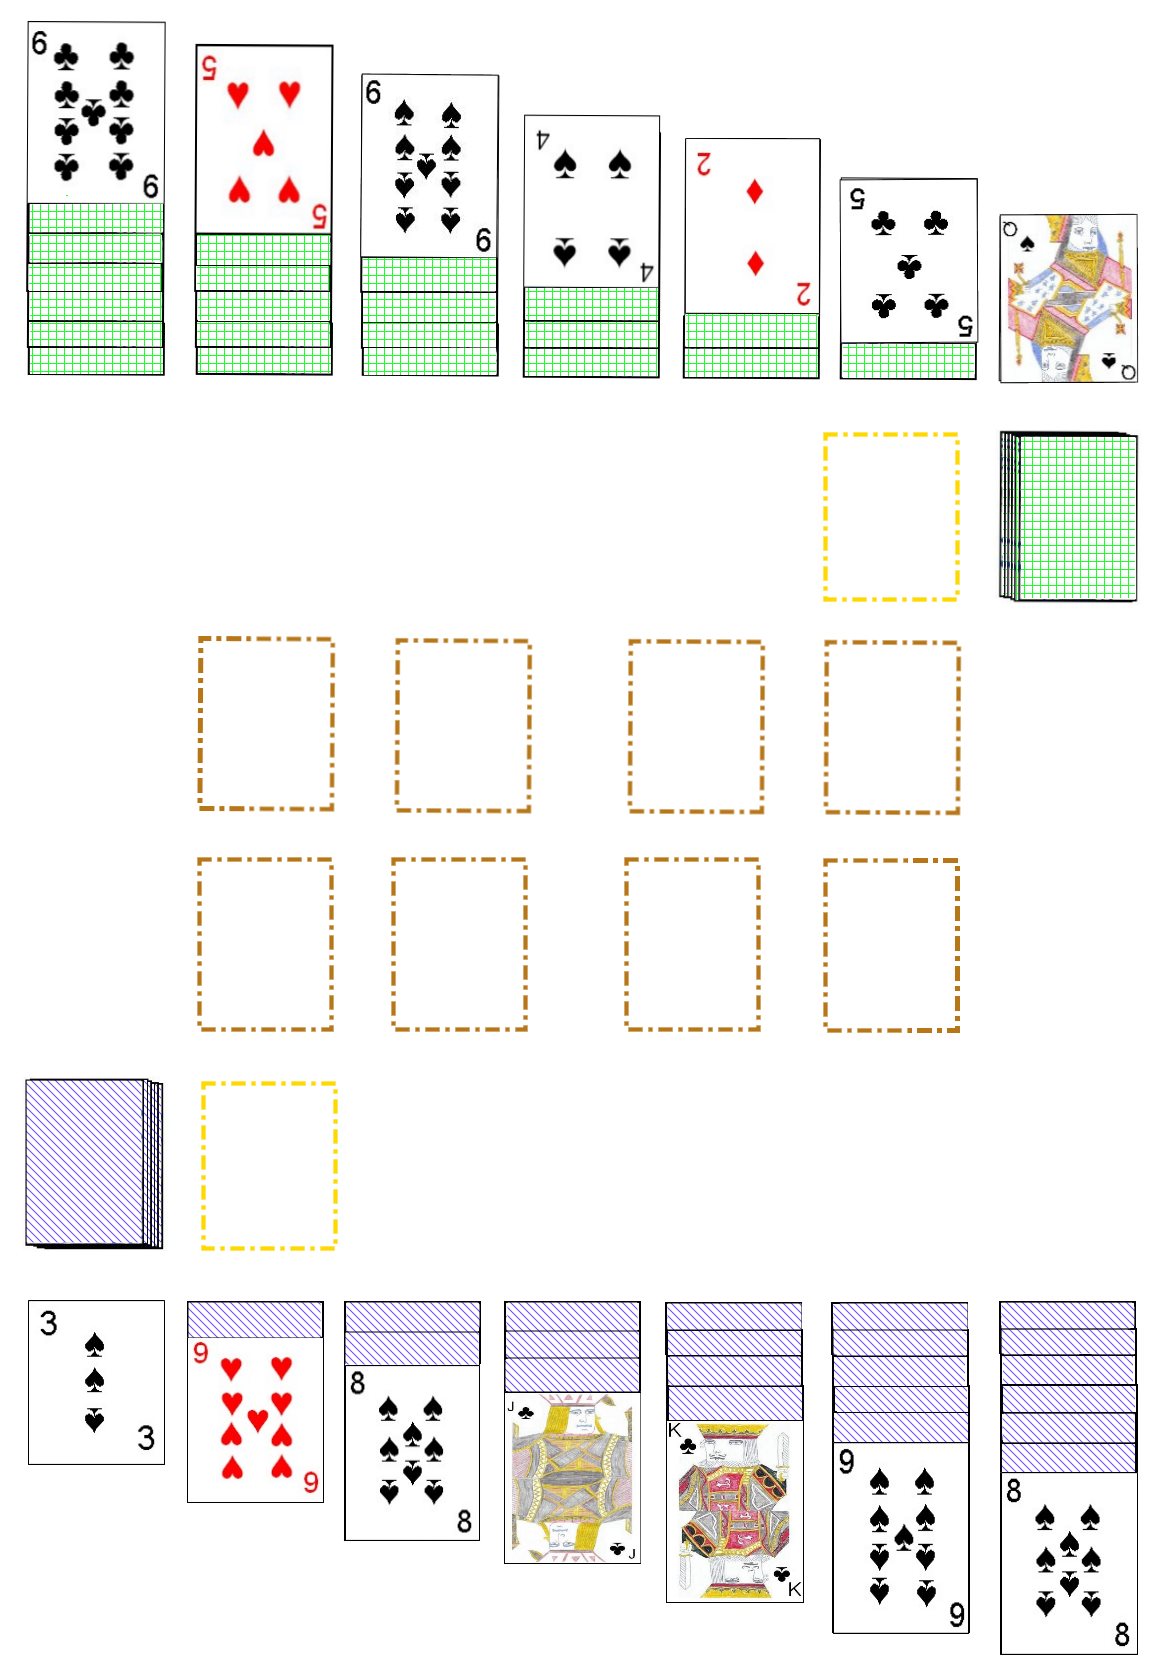 Example Initial Layout for playing Double Klondike Solitaire